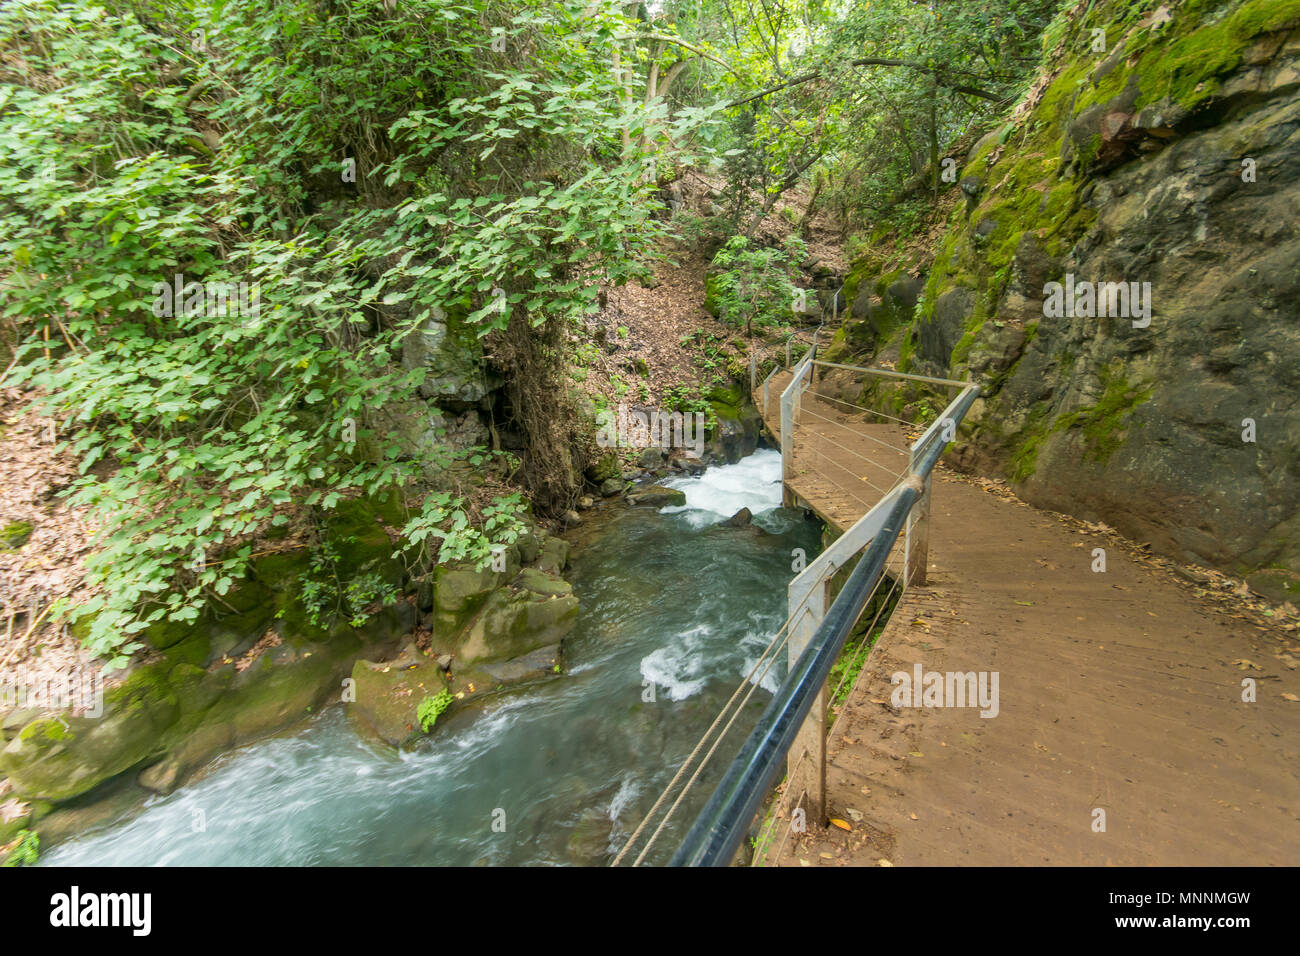 The hanging footpath in the Hermon Stream (Banias) Nature Reserve, Northern Israel Stock Photo